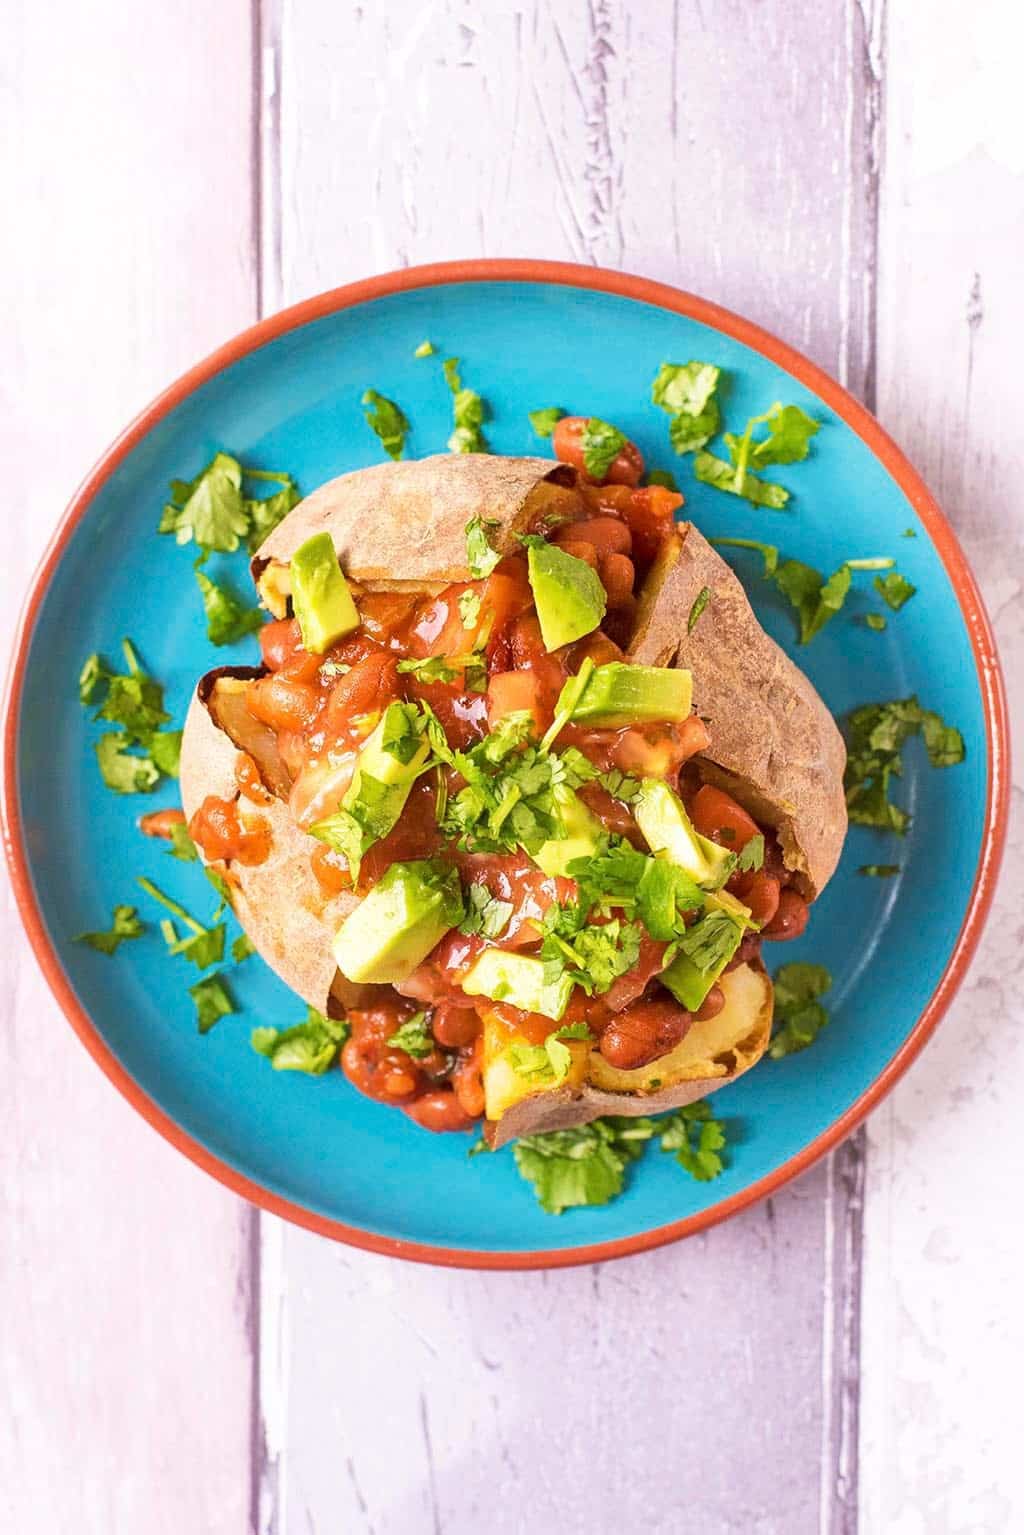 Baked Potato topped with Mexican Beans and diced Avocado.